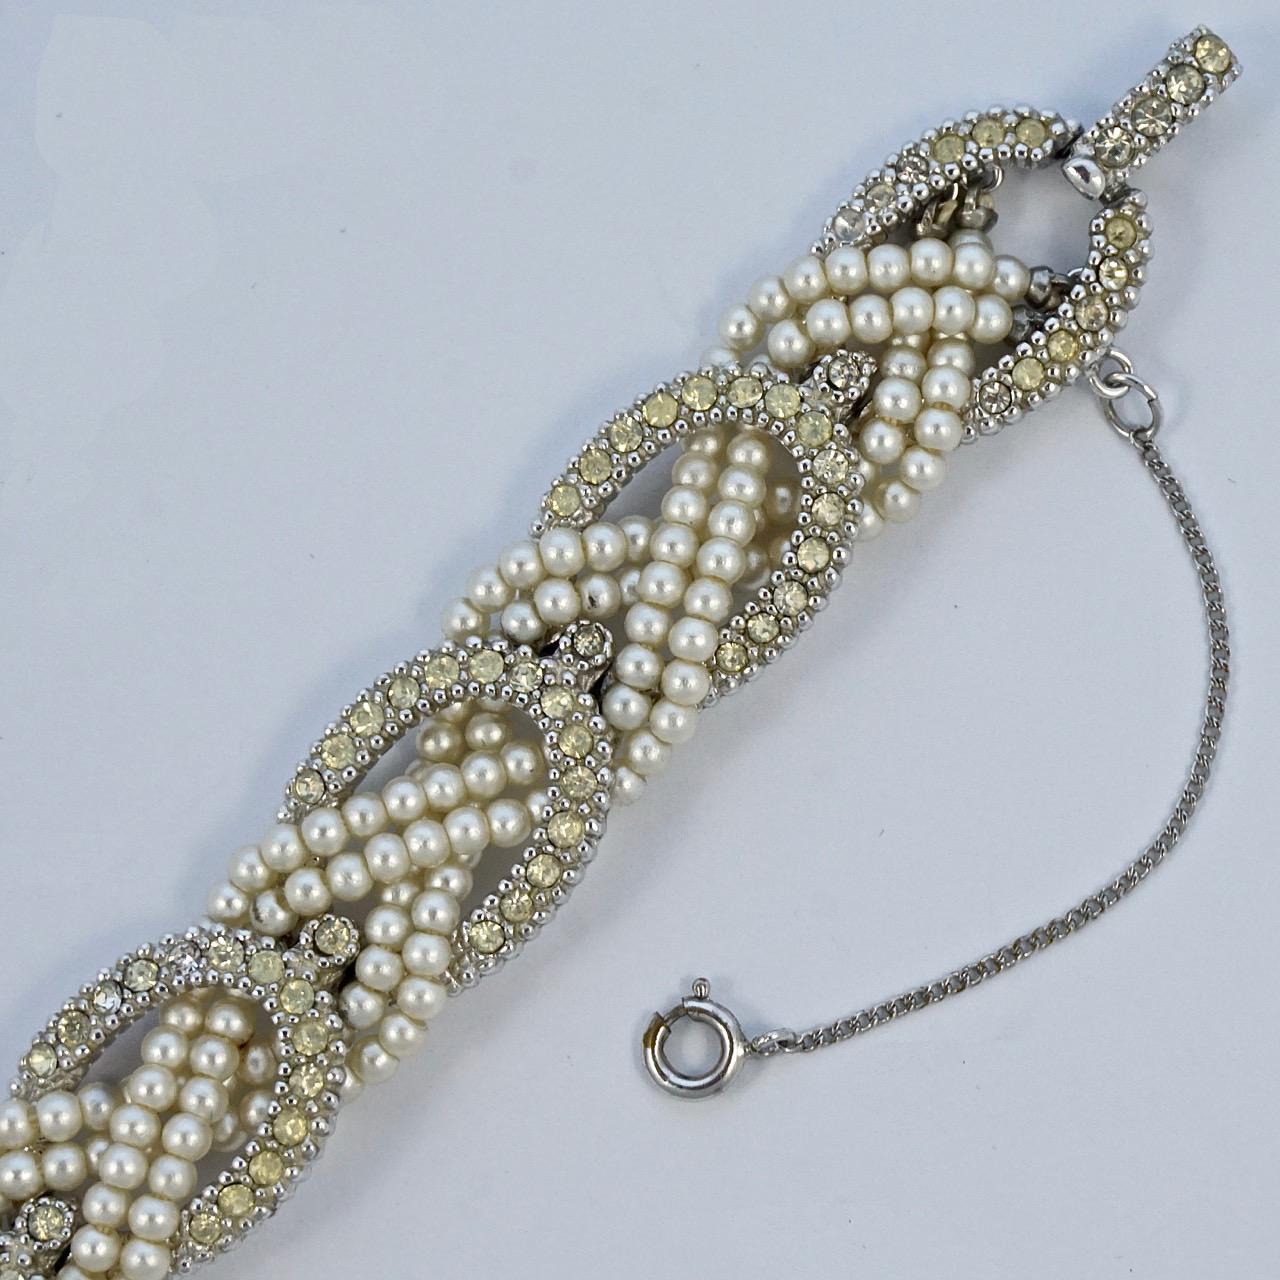 Fabulous Ciner silver plated bracelet with a safety chain, featuring two rows of ivory faux pearls and rhinestone links. Measuring length 19.2cm / 7.5 inches by width 1.5cm / .6 inch. The bracelet is in very good condition.

This is a beautiful and